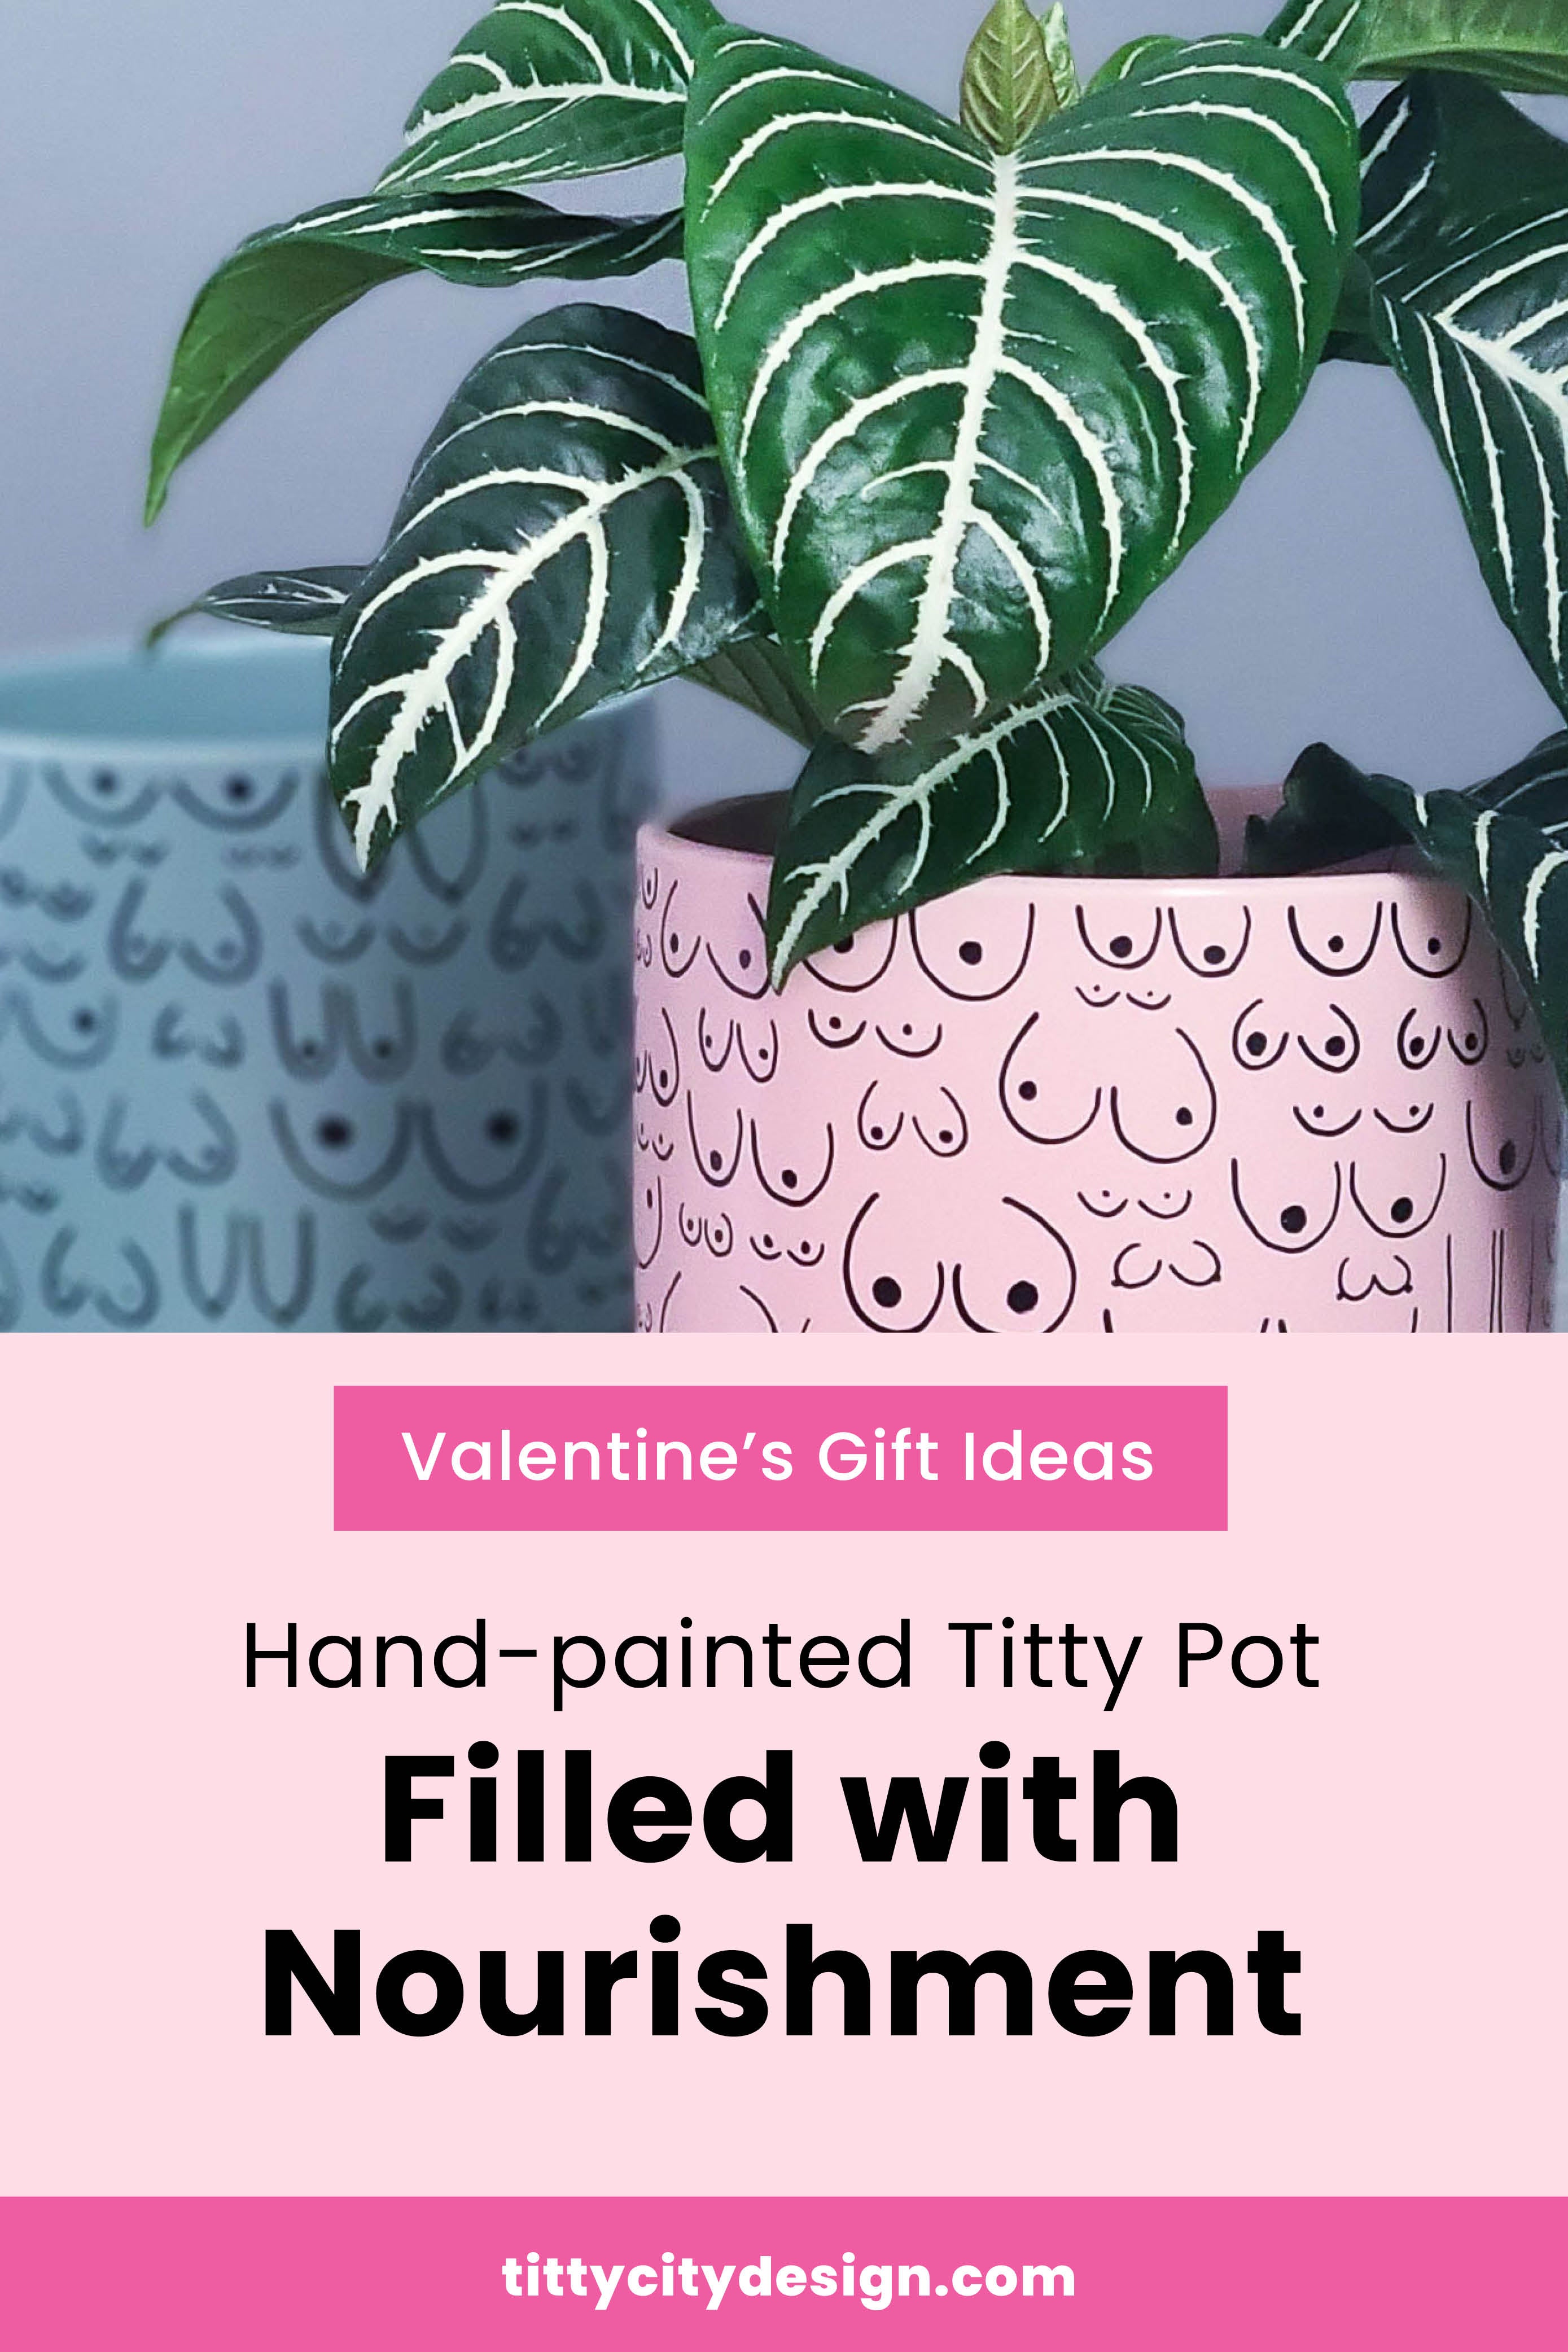 Valentines Gift Idea - Pink Hand Painted Boob Planter "Filled with Nourishment"